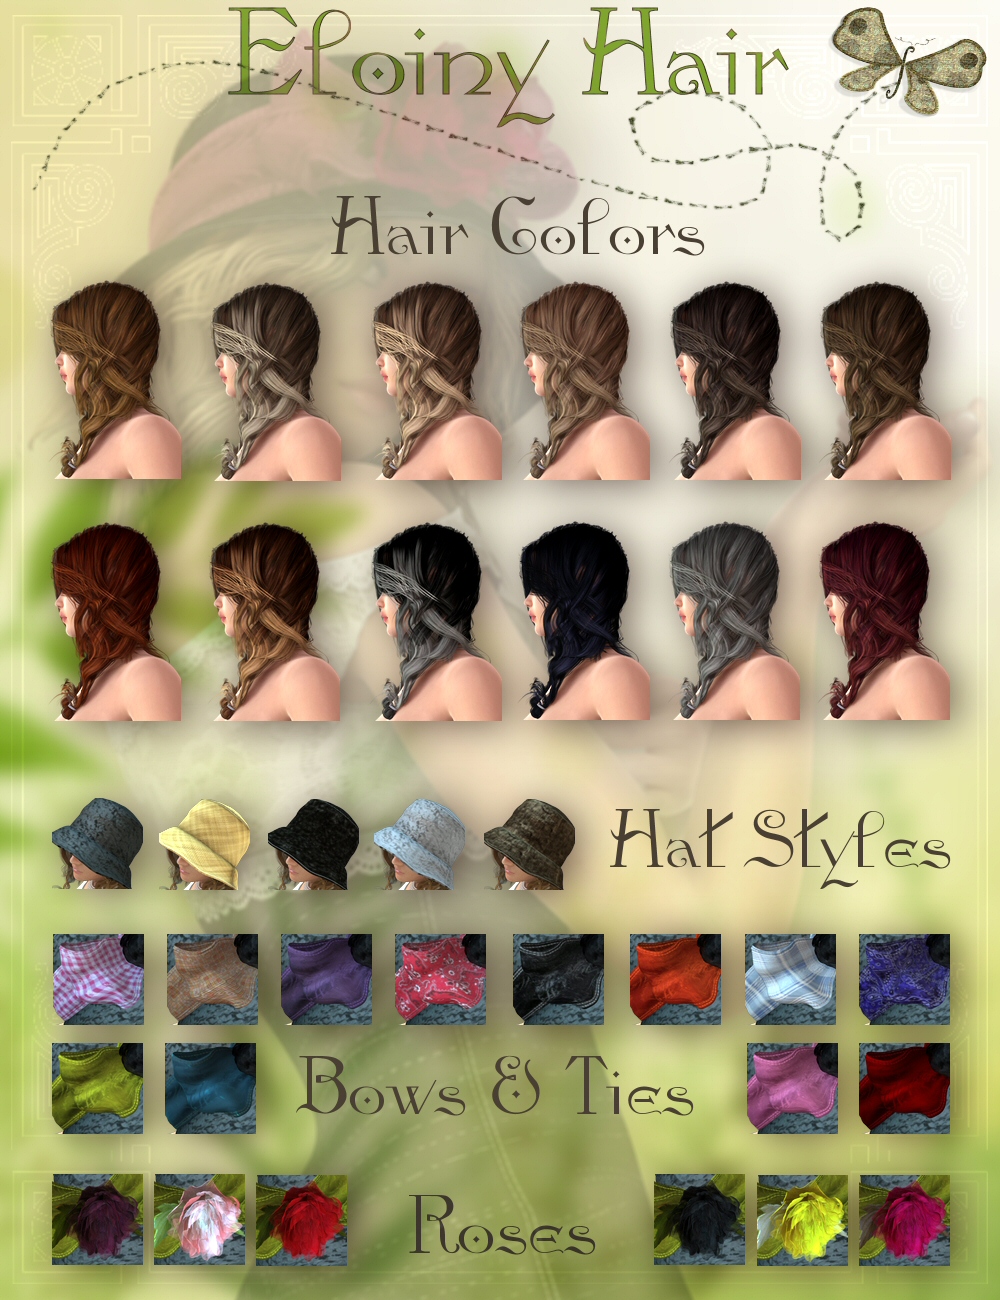 Eloiny Hair PLUS for Victoria 4 and Genesis 2 Female(s) by: goldtassel, 3D Models by Daz 3D